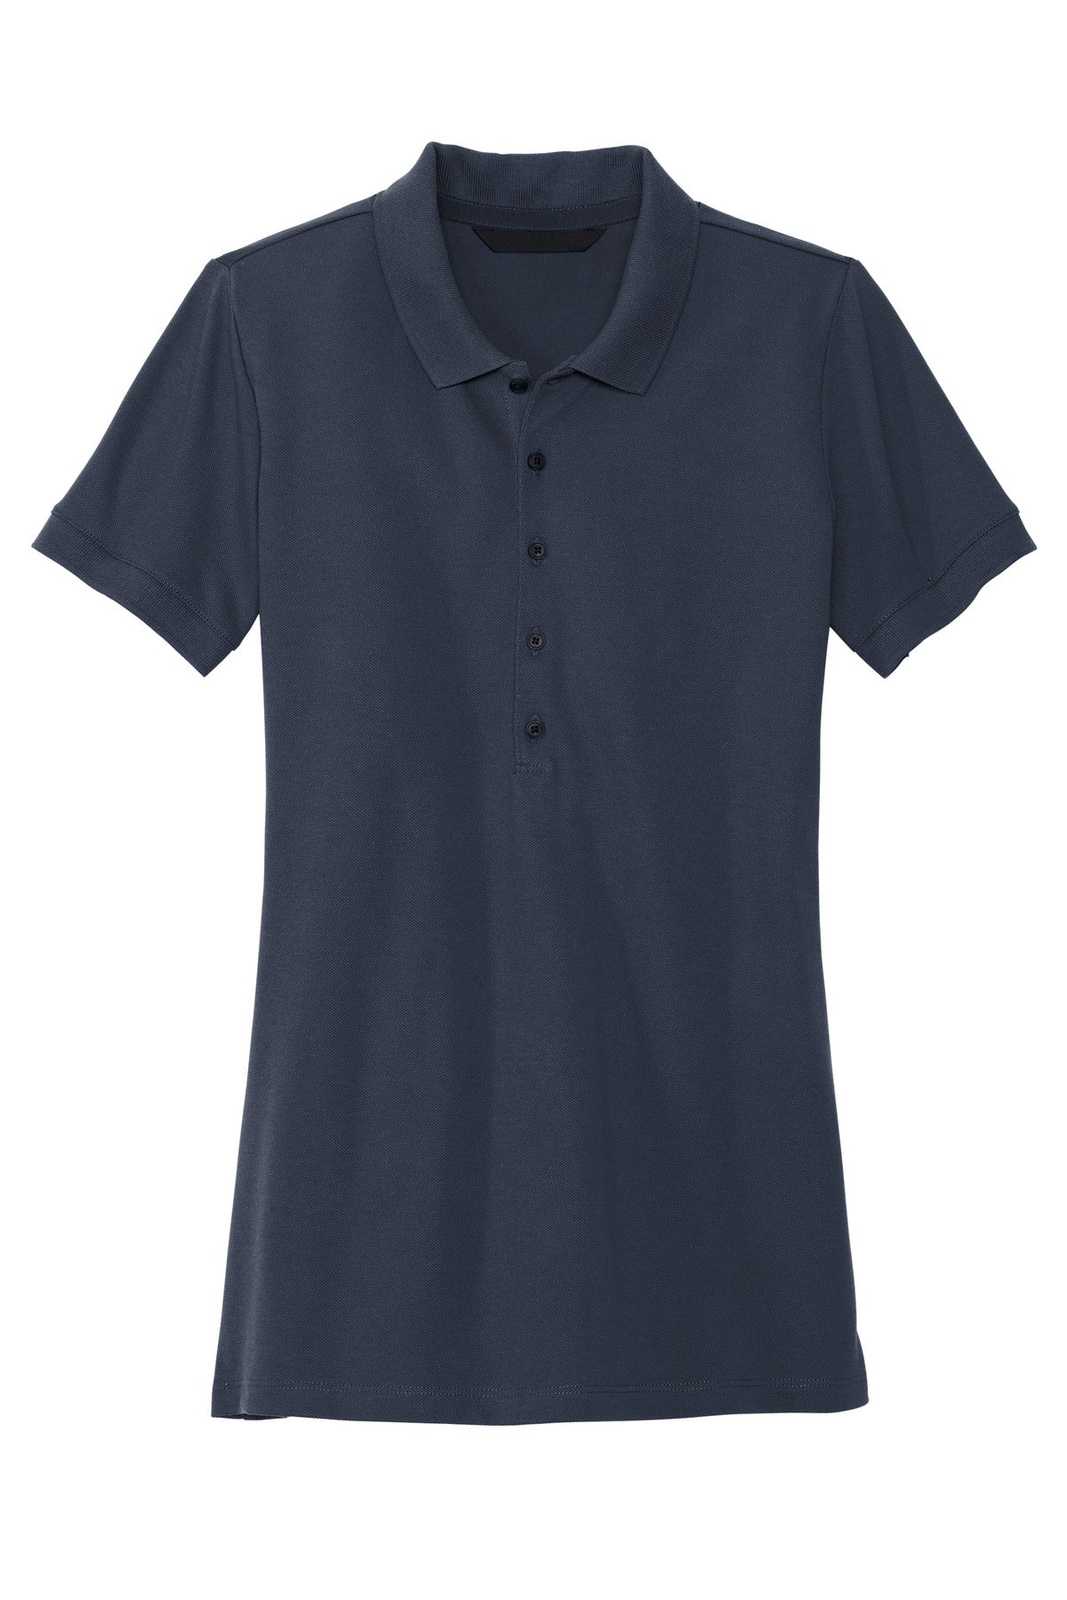 Mercer+Mettle MM1001 Women's Stretch Heavyweight Pique Polo - Night Navy - HIT a Double - 1